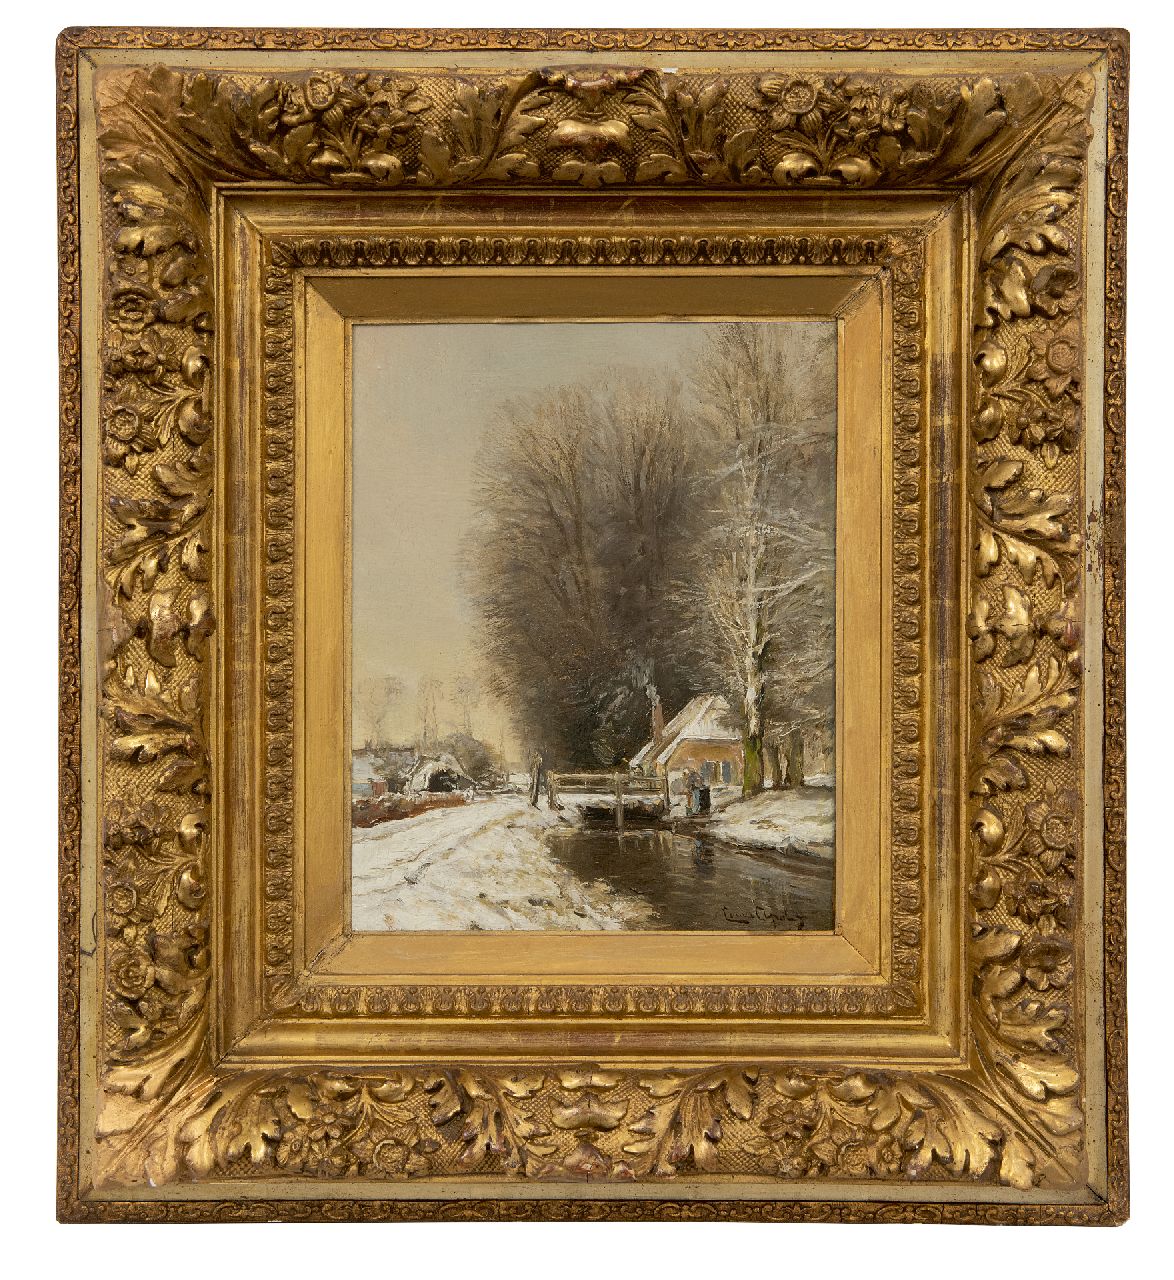 Apol L.F.H.  | Lodewijk Franciscus Hendrik 'Louis' Apol | Paintings offered for sale | Snowy path along theforest, oil on panel 27.2 x 21.5 cm, signed l.r.